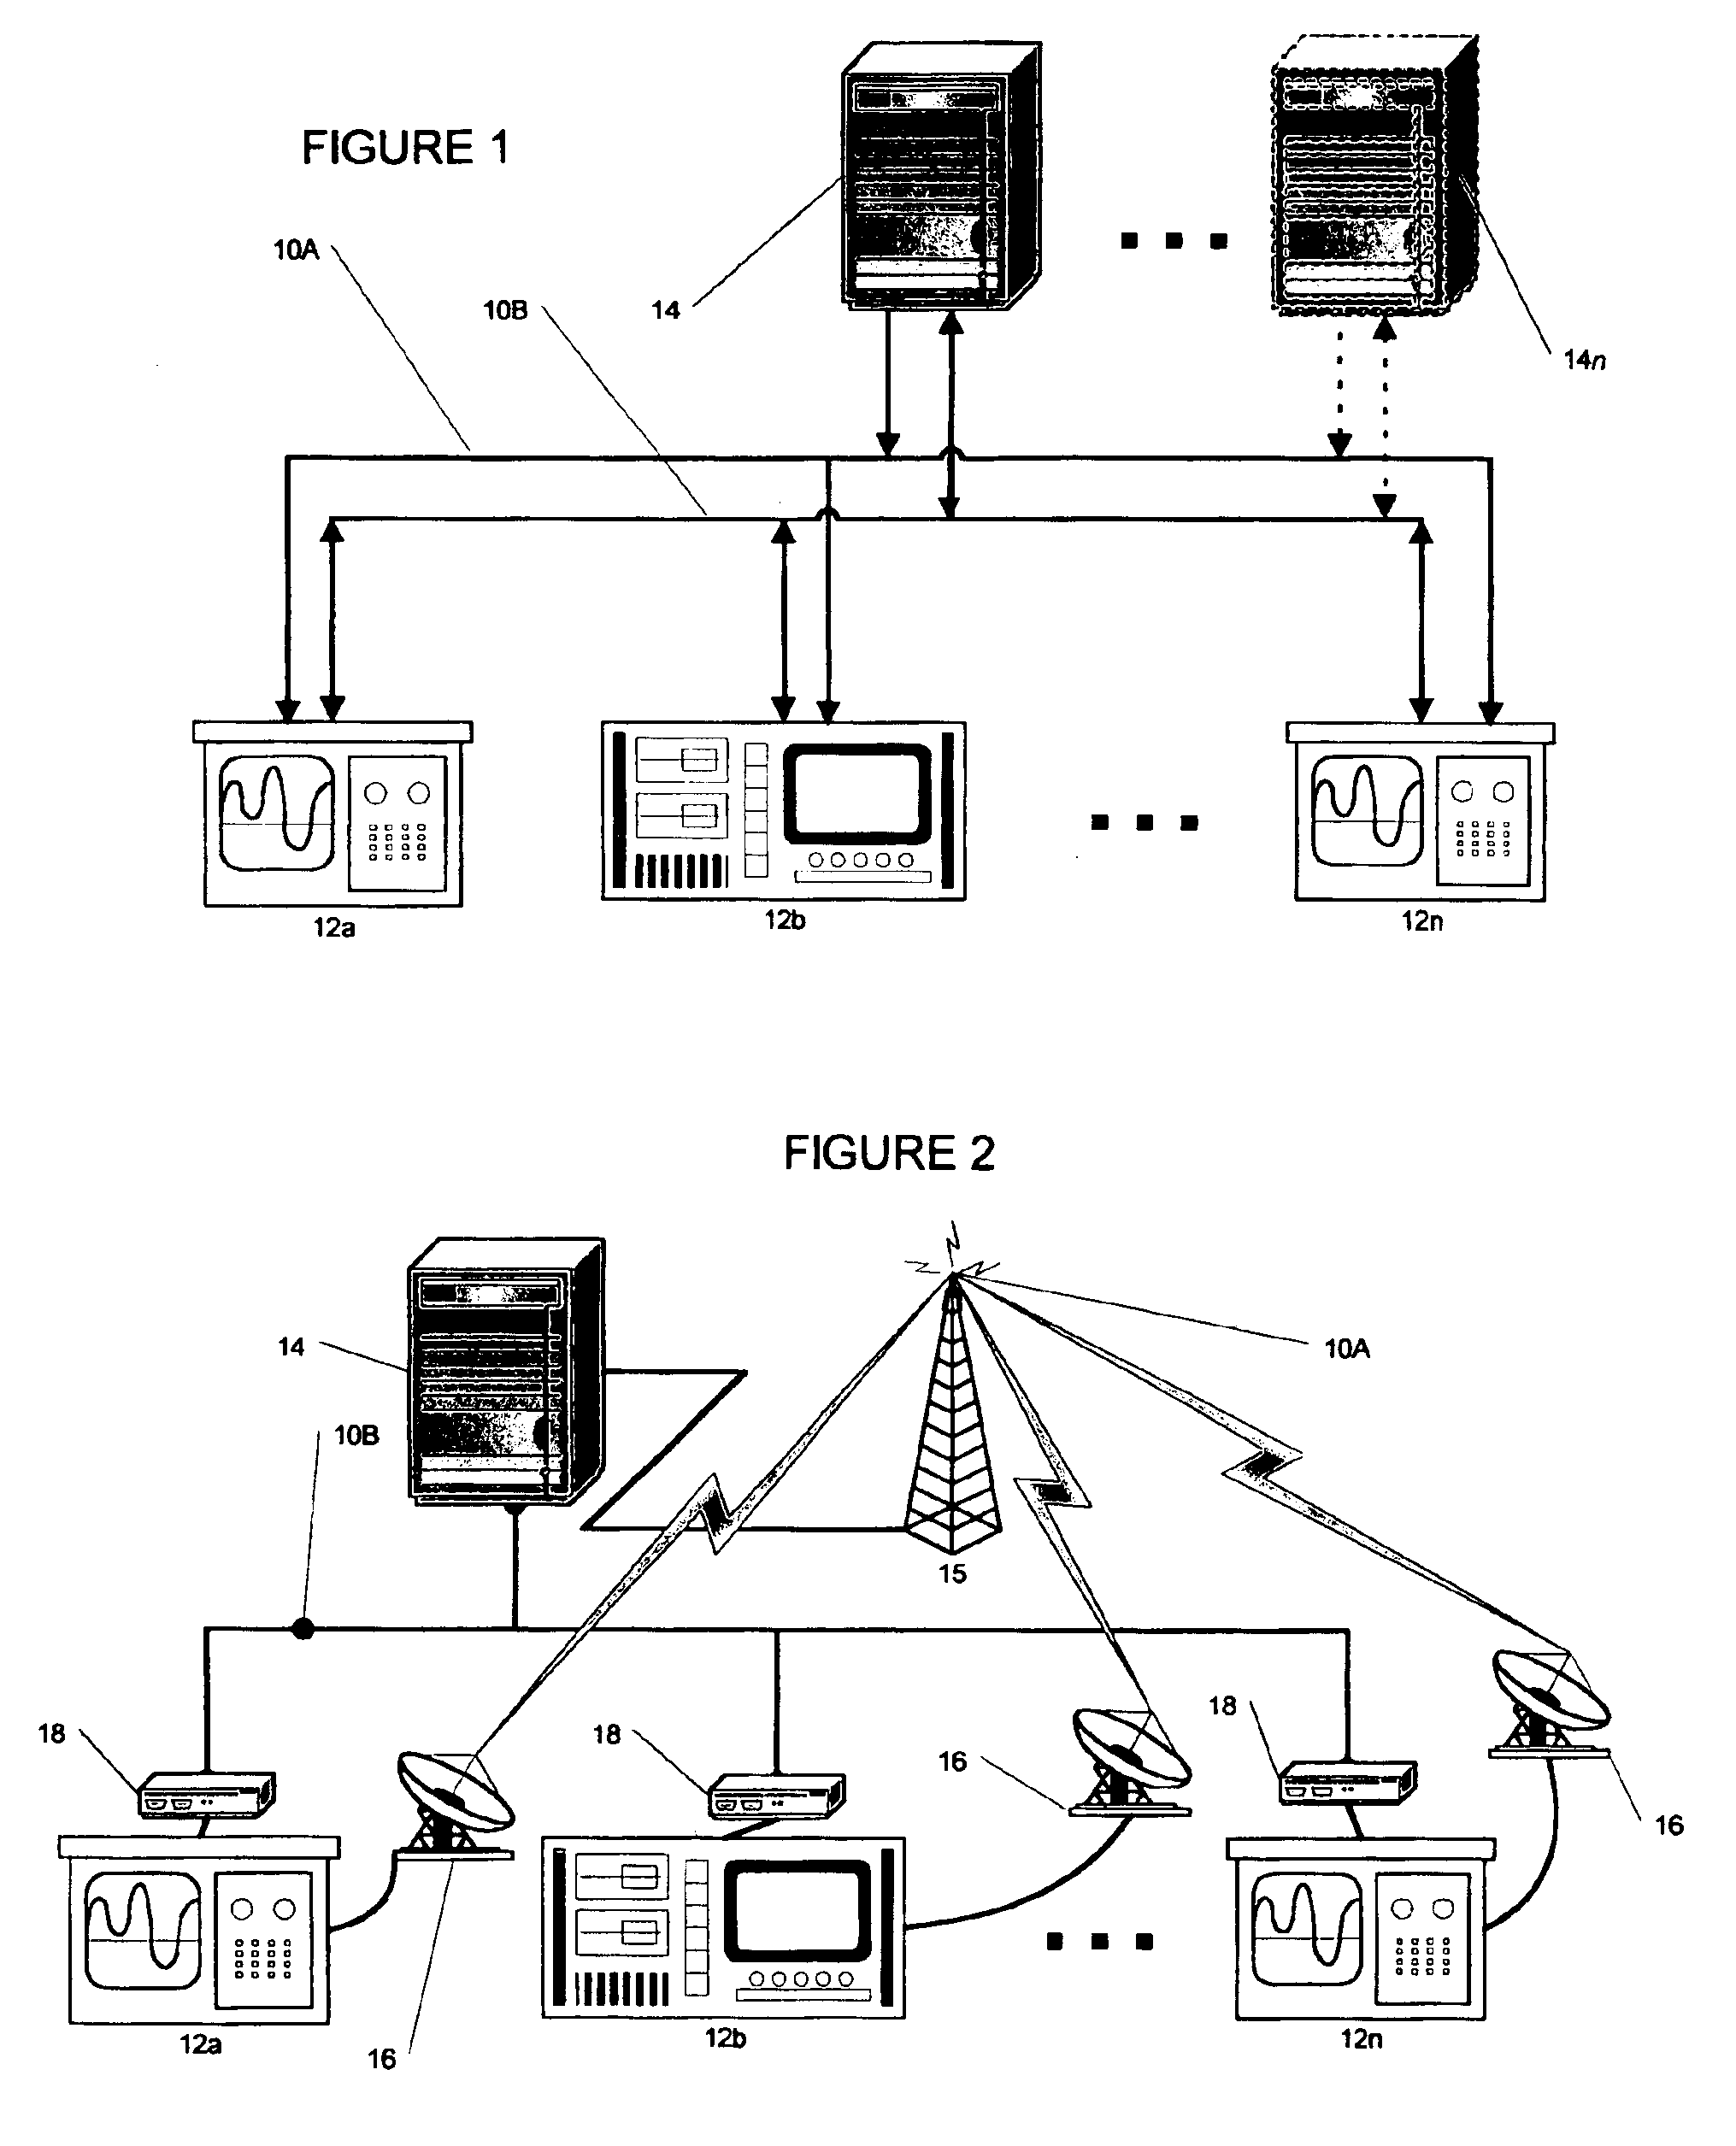 Method and apparatus for efficient use of communication channels for remote telemetry